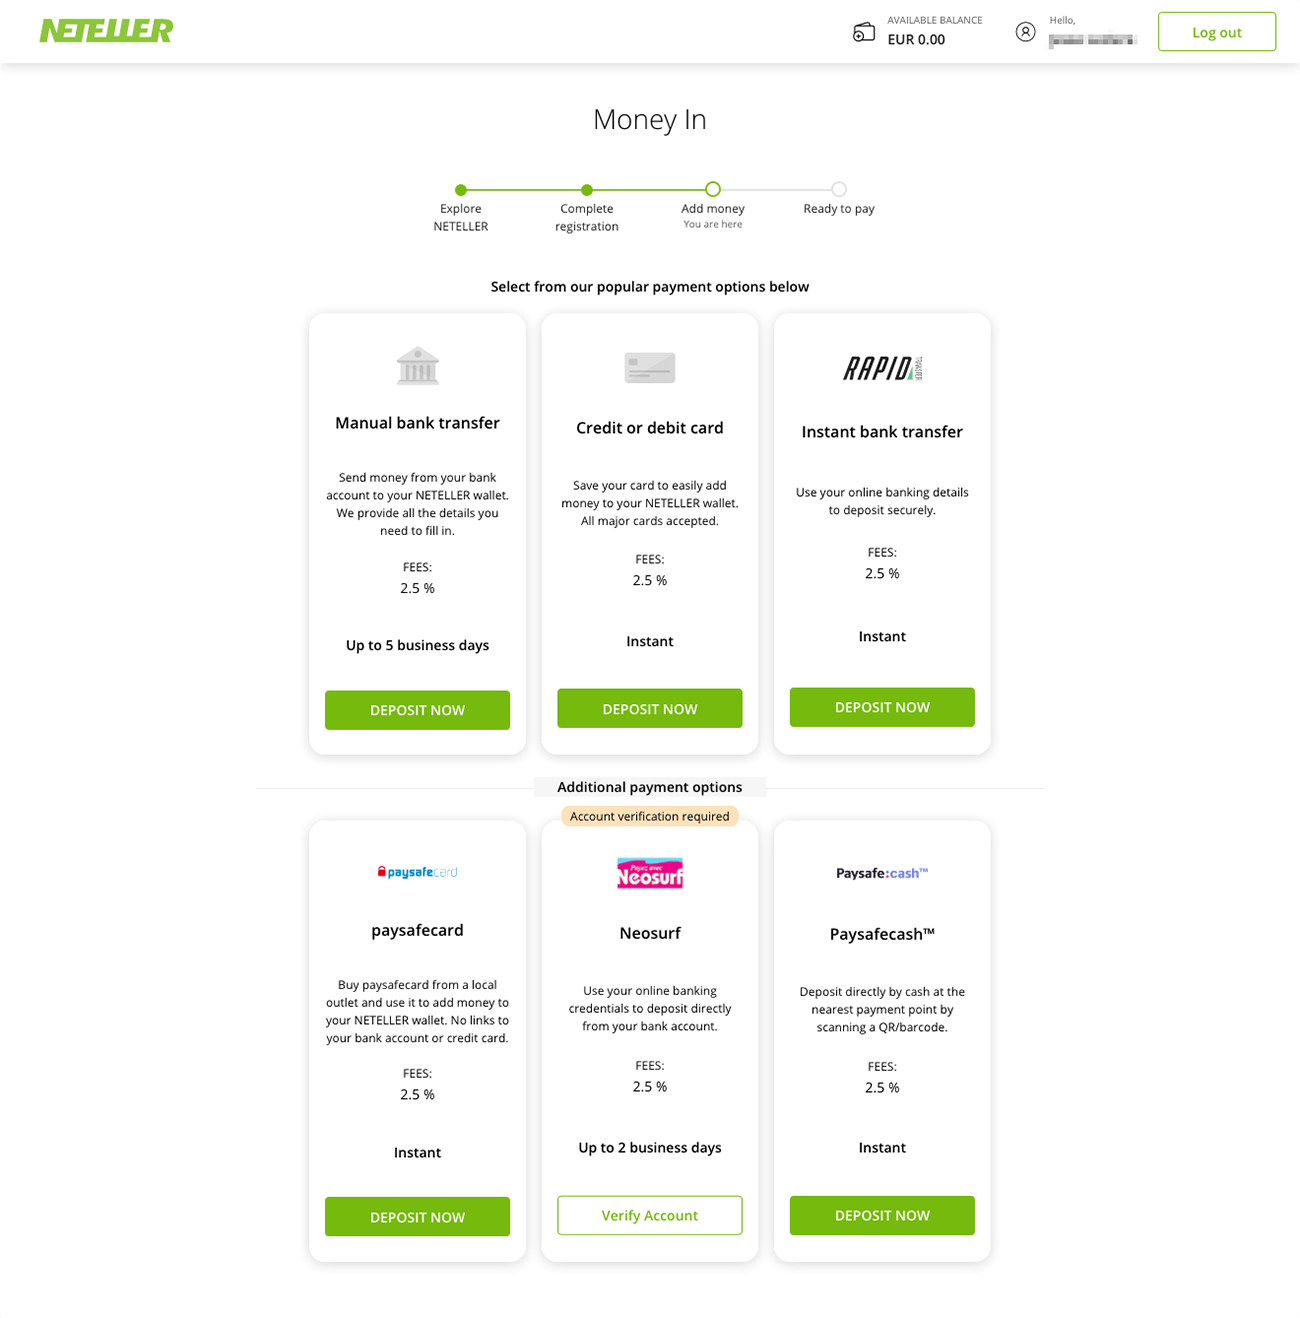 Where & How To Buy Bitcoin With Neteller | Beginner’s Guide